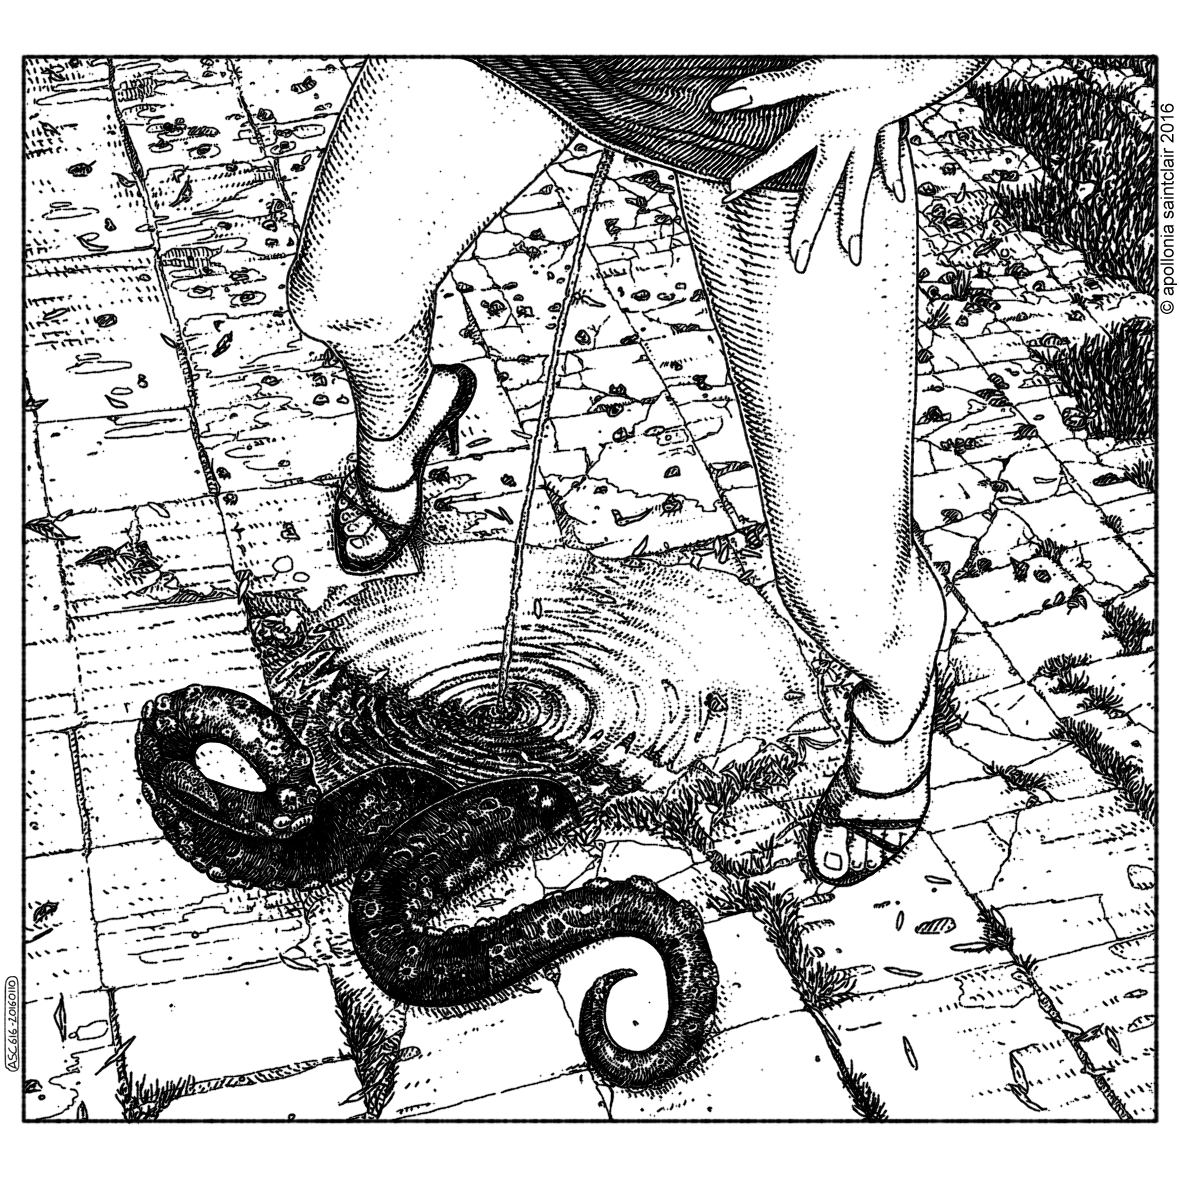 Apollonia Saintclair 616 - 20160110 Les libations (Call upon His name and He will answer)